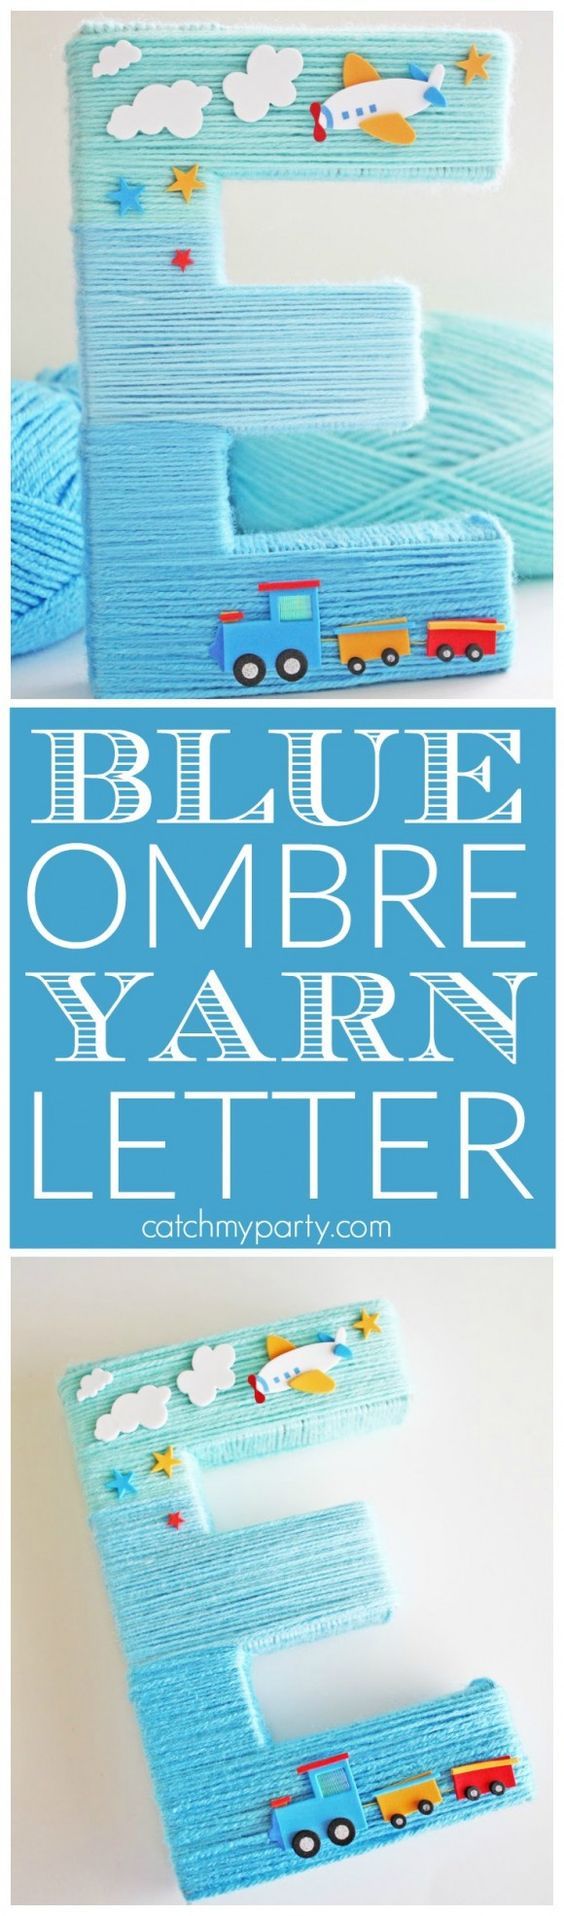 Blue Yarn Wrapped Ombre Monogram Letter. 